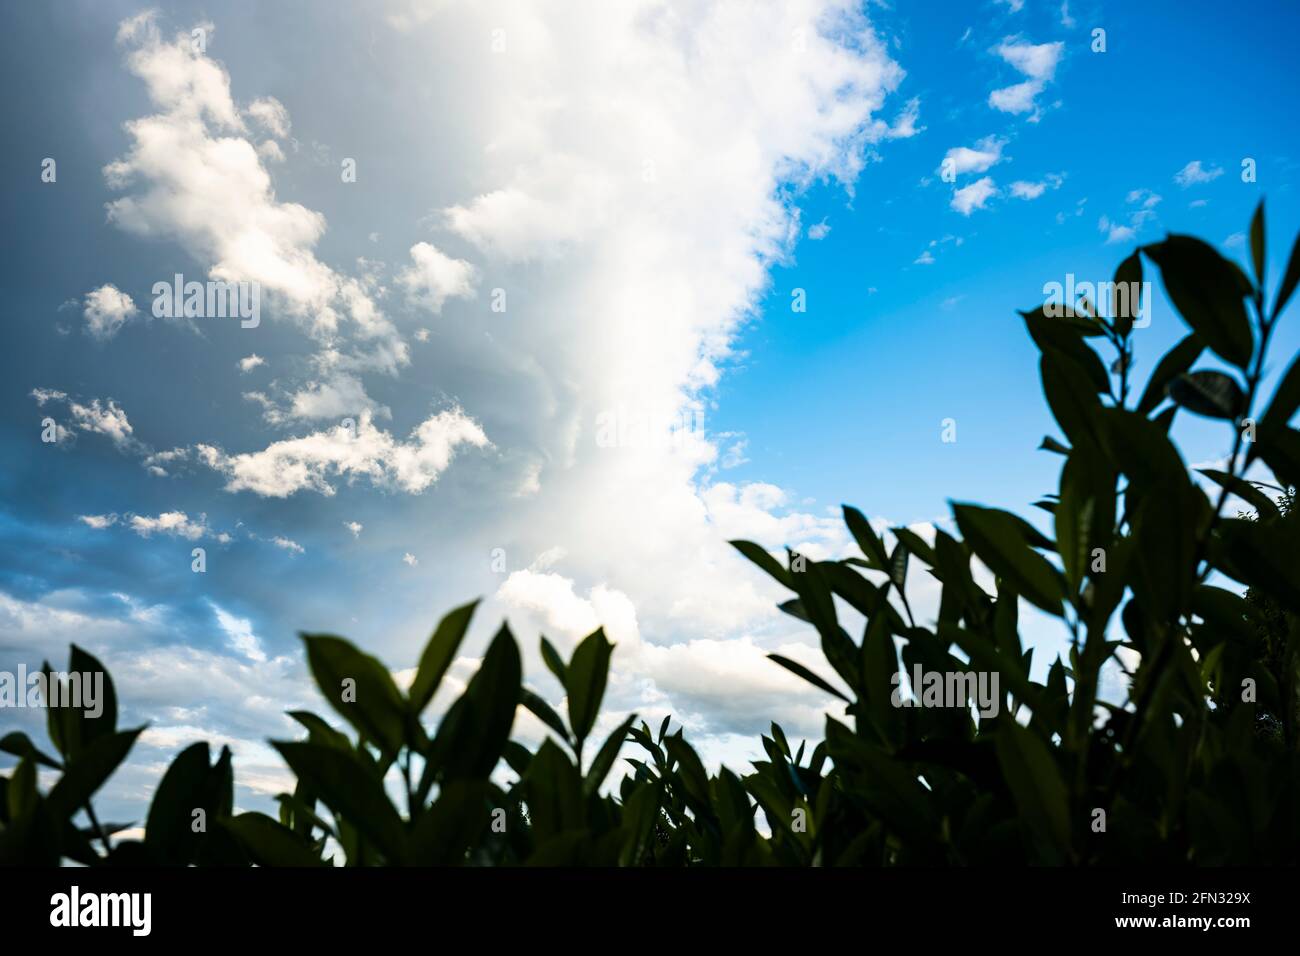 Stunning view of a blue sky with some beautiful clouds and some blurred leaves in the foreground. Dramatic landscape, natural background. Stock Photo